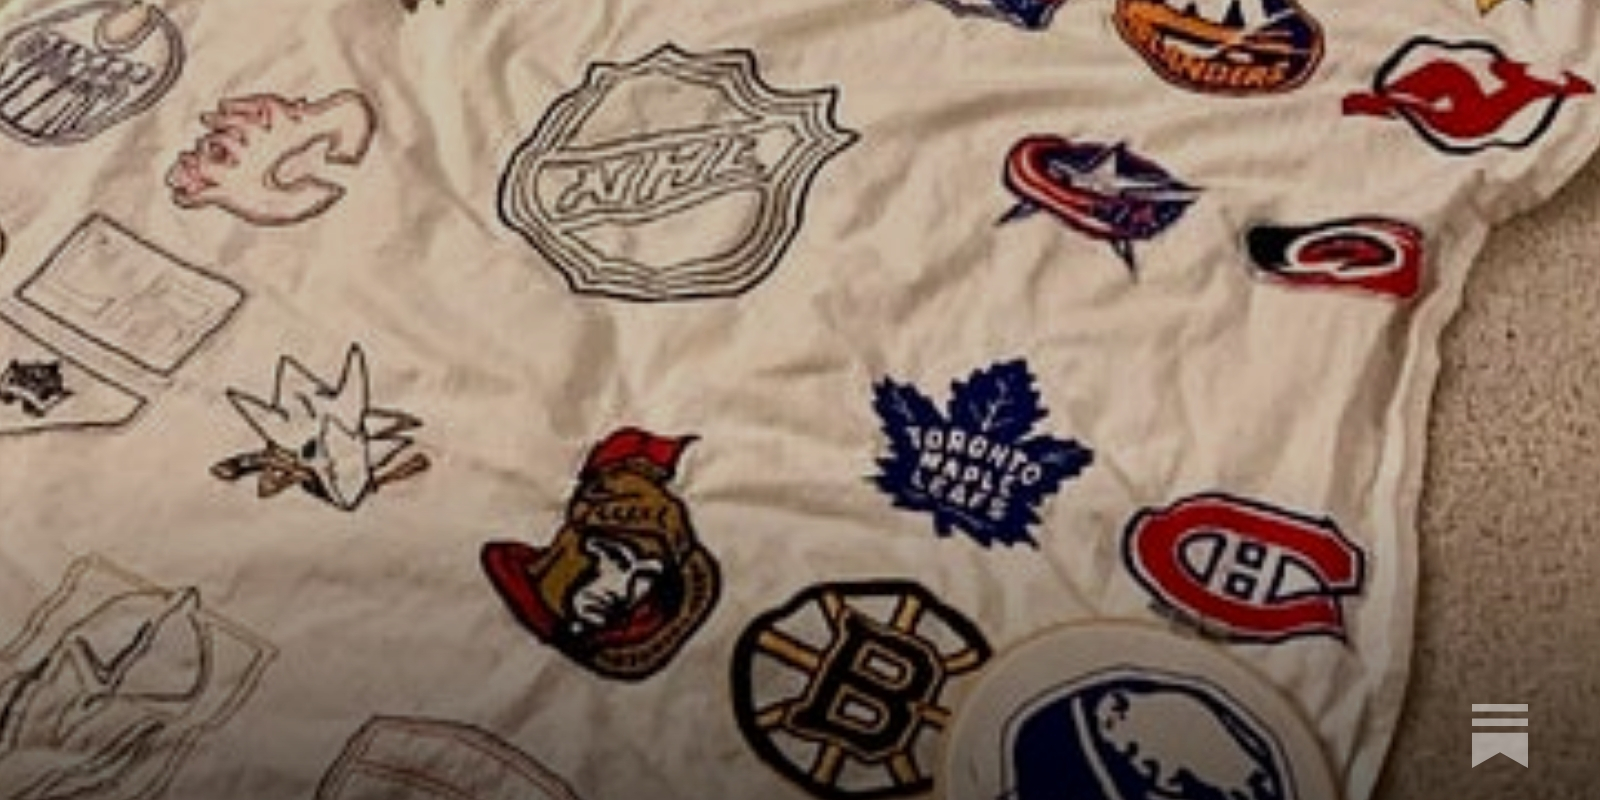 Let's Admire This Amazing NHL Logo Embroidery Sampler